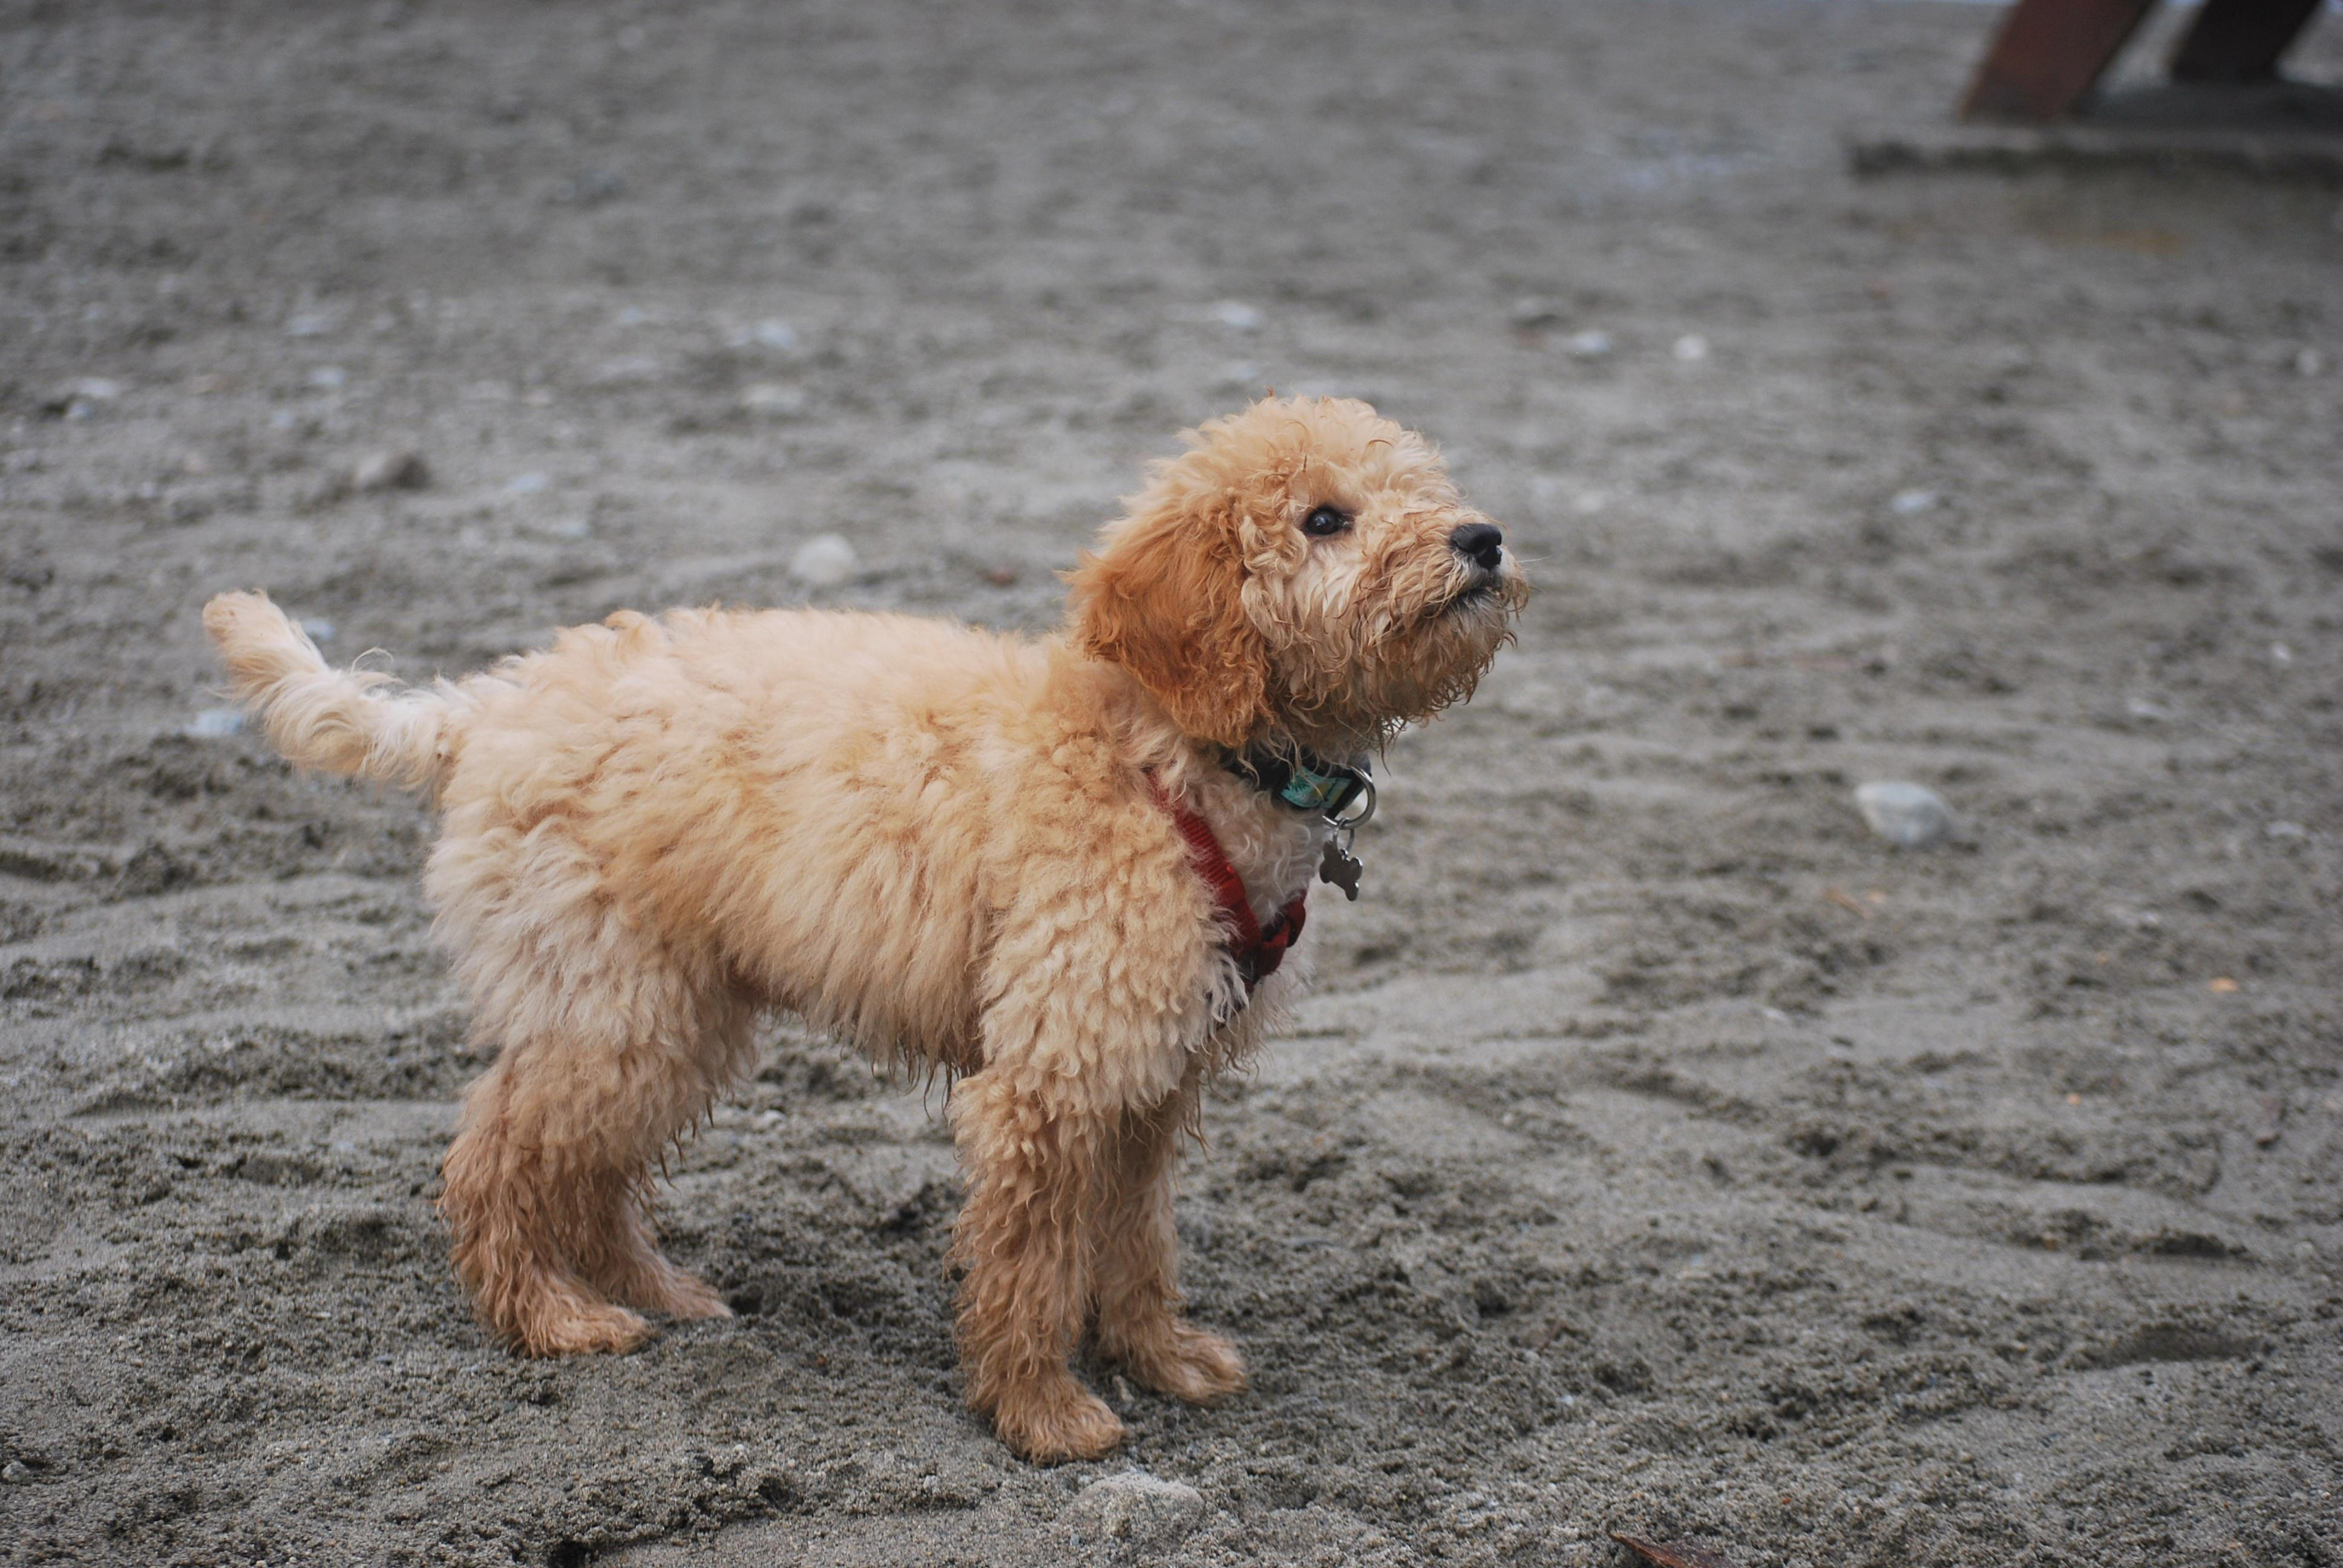 "How to Choose the Right Size Crate for Your Standard Goldendoodle"